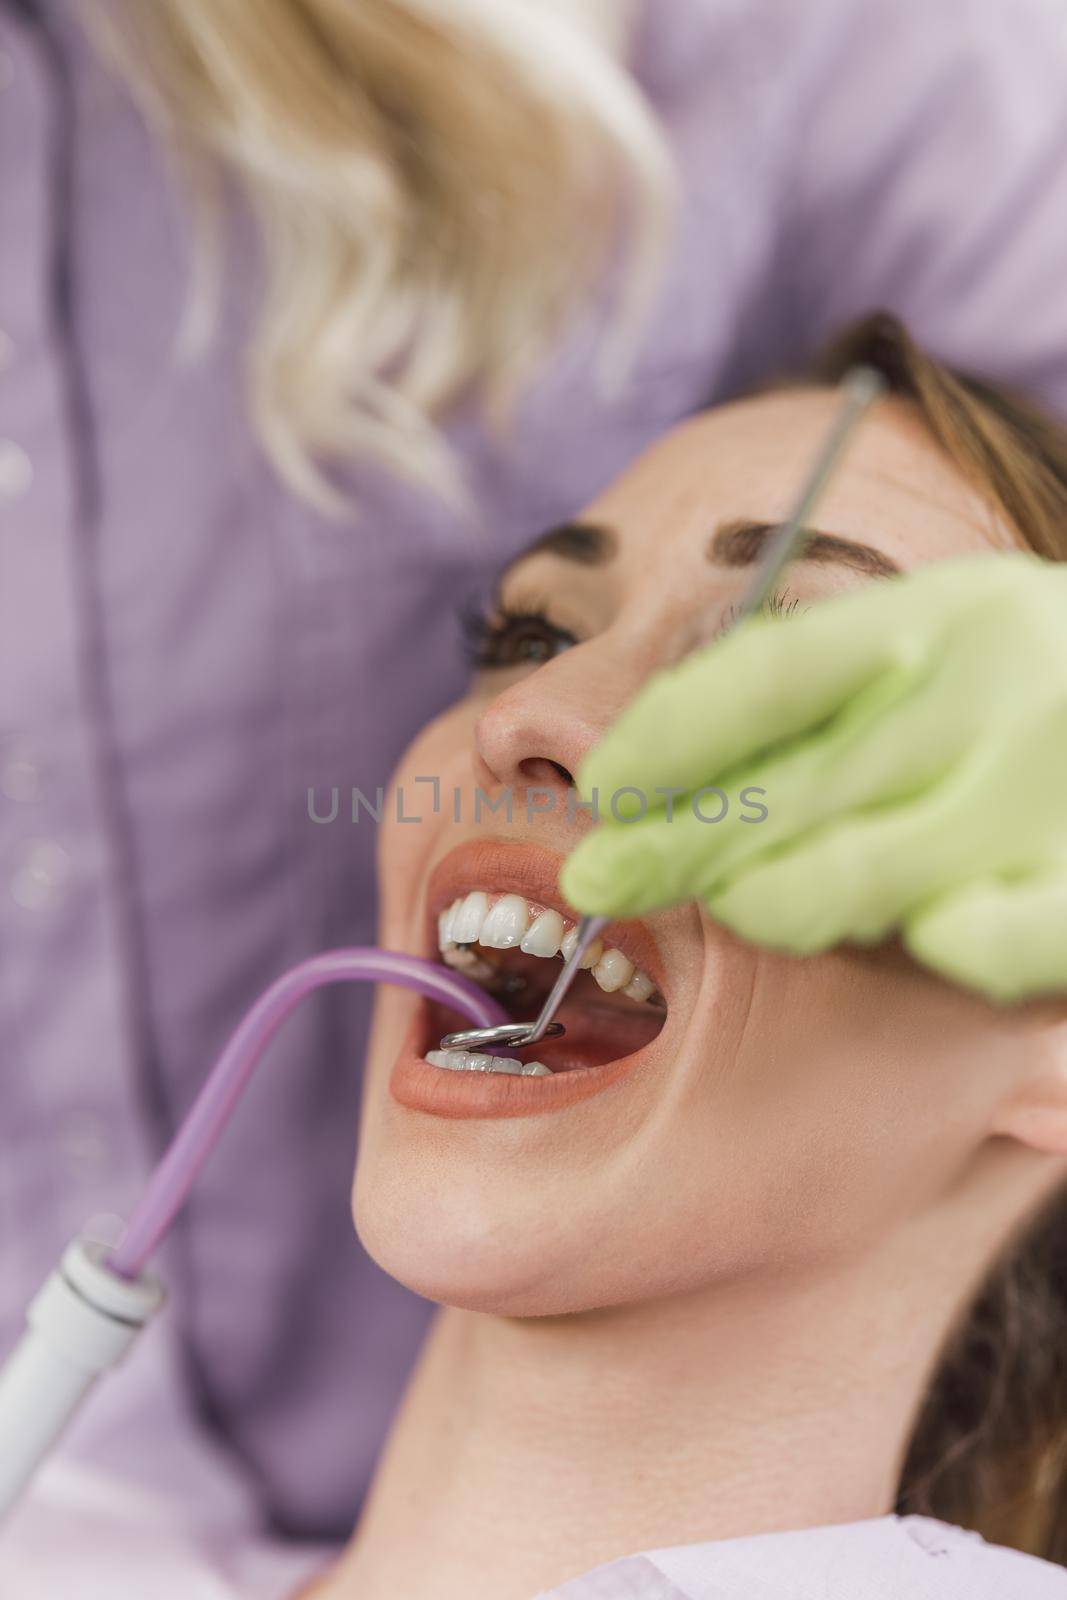 Close-up of a young woman having dental work done on her teeth.